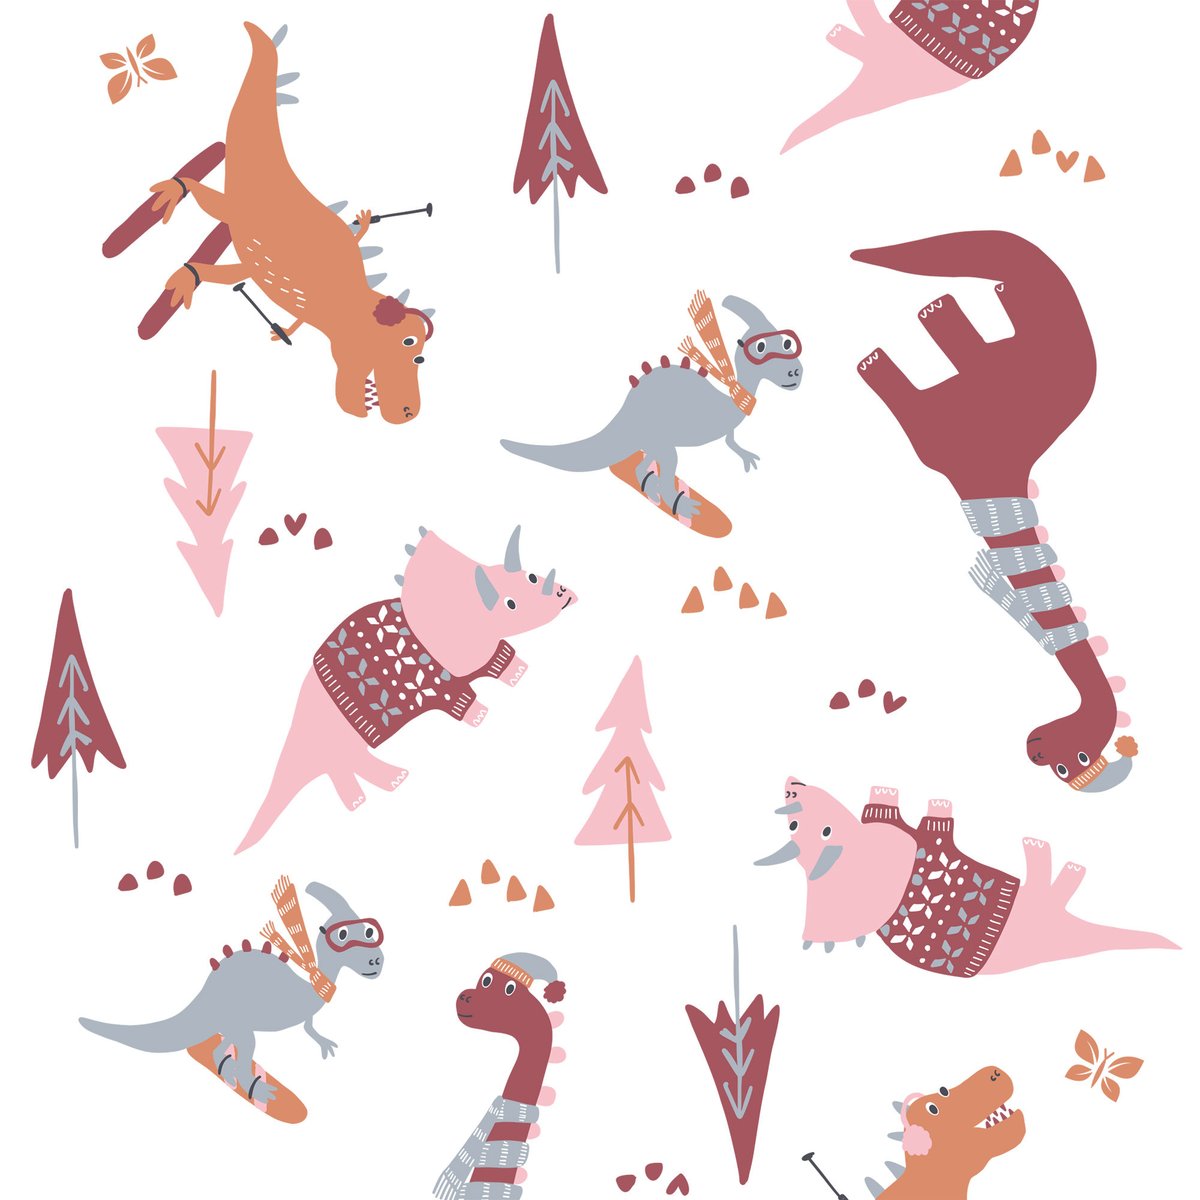 We're spreading some holiday magic for your bundle of joy this season with our NEW limited edition holiday prints: 🍪 Oh Gingersnap! 🚜 Mistle-Tow Zone 🐶 Four-Woof Drive 🦖 Let It Dino-Snow Get into the holiday spirit here! bit.ly/3FZY2ex ❄️